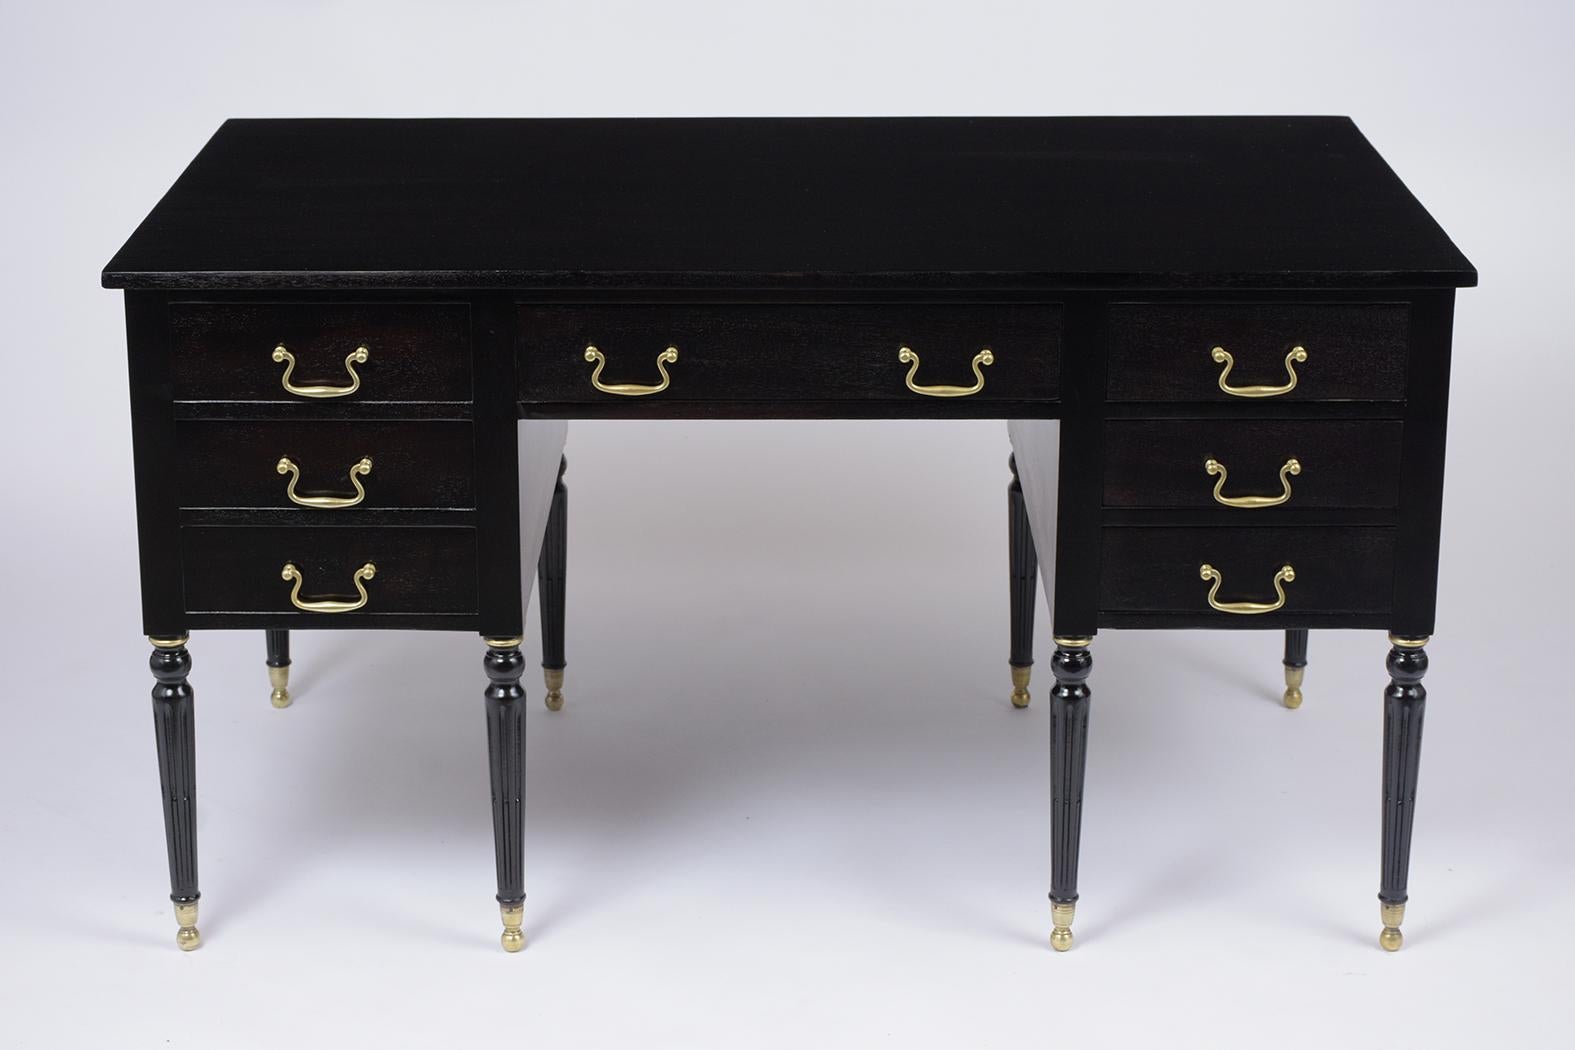 This Regency 1900s English partner desk has been restored, is made out of solid mahogany wood, and has been newly finished in an ebonized color with a lacquered finish. This executive desk features a wooden top, eight drawers total, four on each